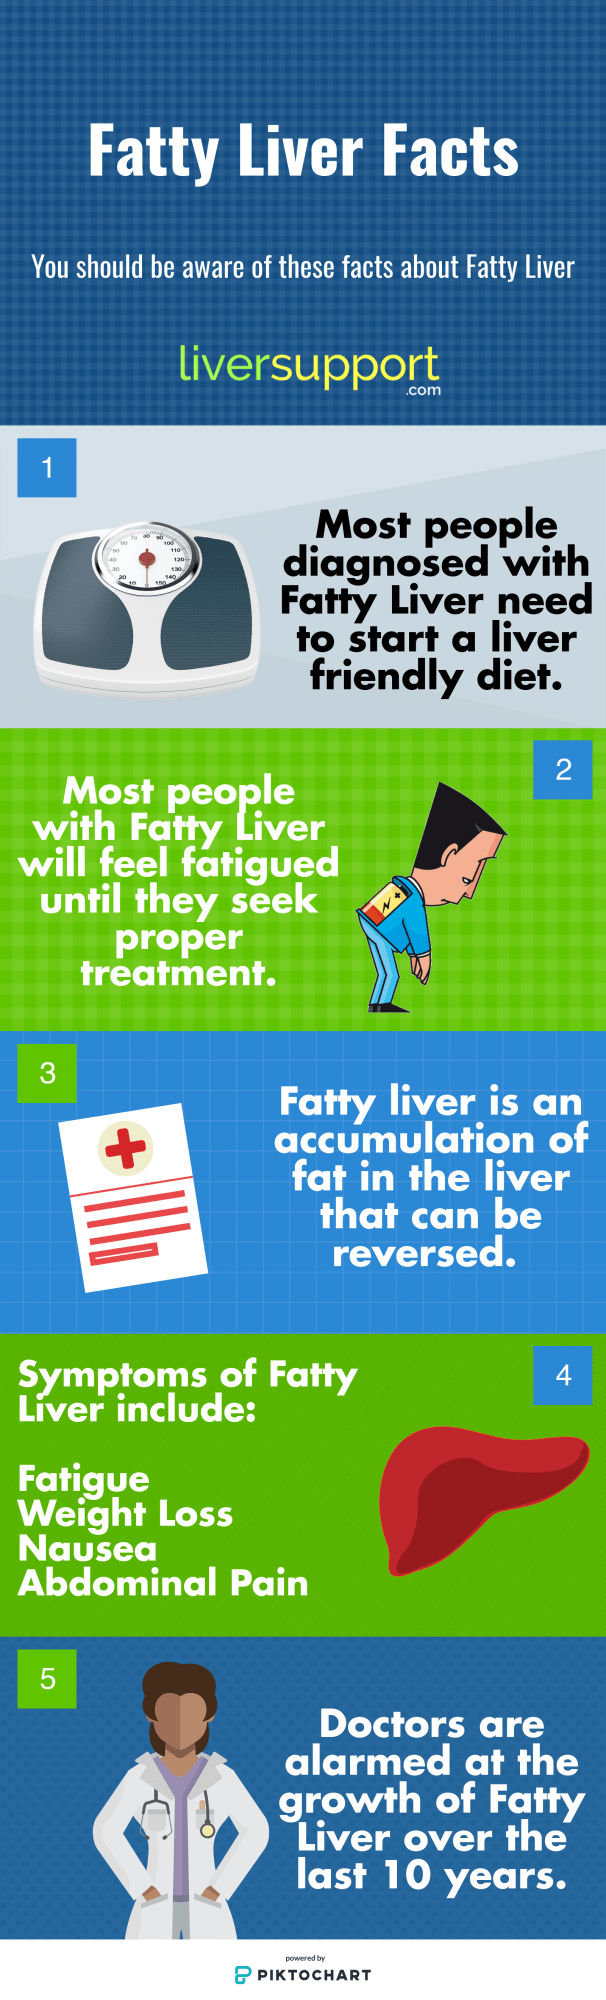 Fatty Liver Facts Infographic